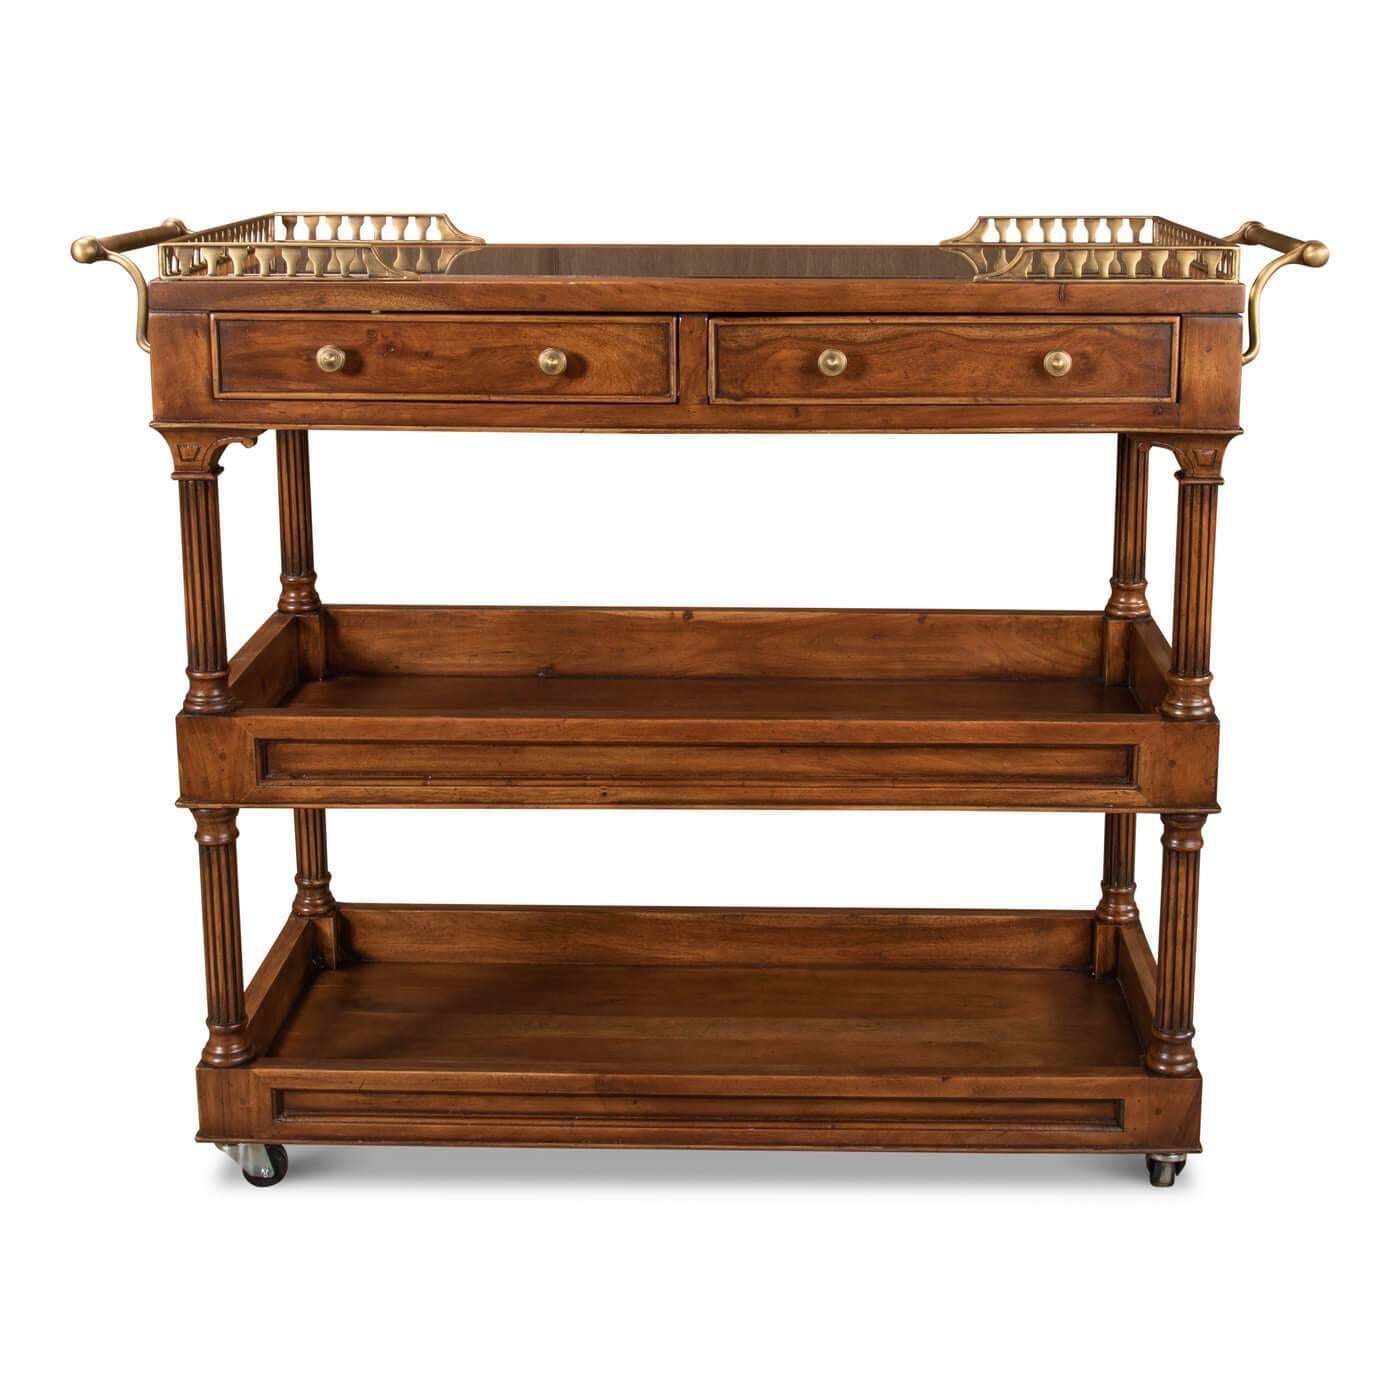 Traditional style walnut rolling bar and serving cart accented with brass railing and handle. This bar cart is beautiful and functional. The inner top is inset with black granite allowing you to wipe down easily before and after use.

The cart